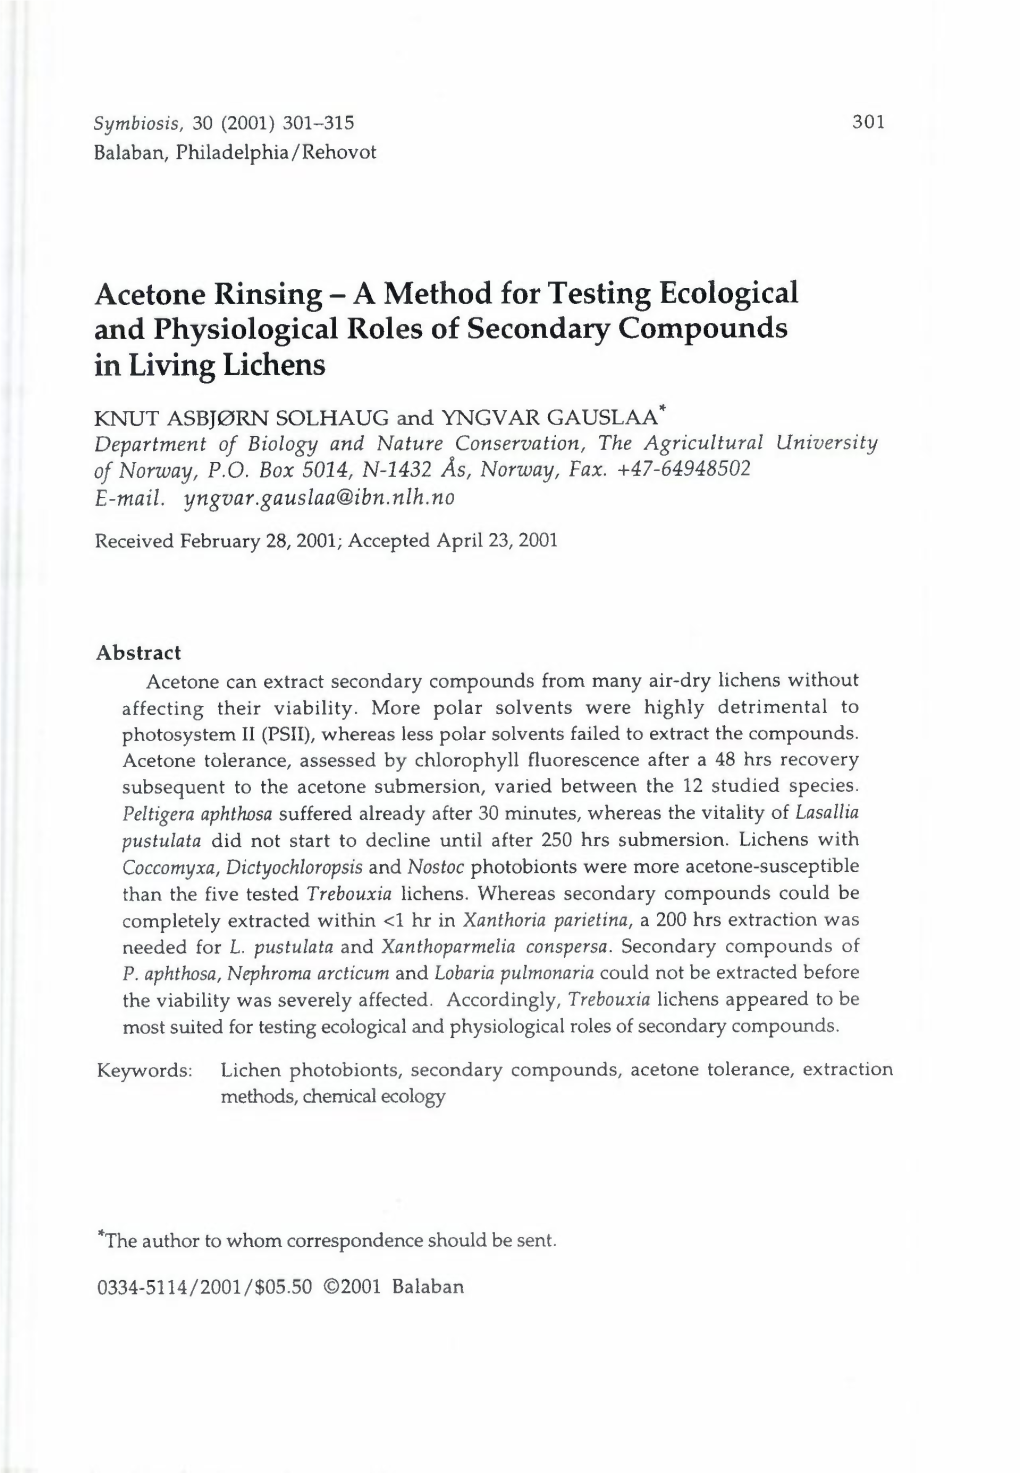 Acetone Rinsing - a Method for Testing Ecological and Physiological Roles of Secondary Compounds in Living Lichens